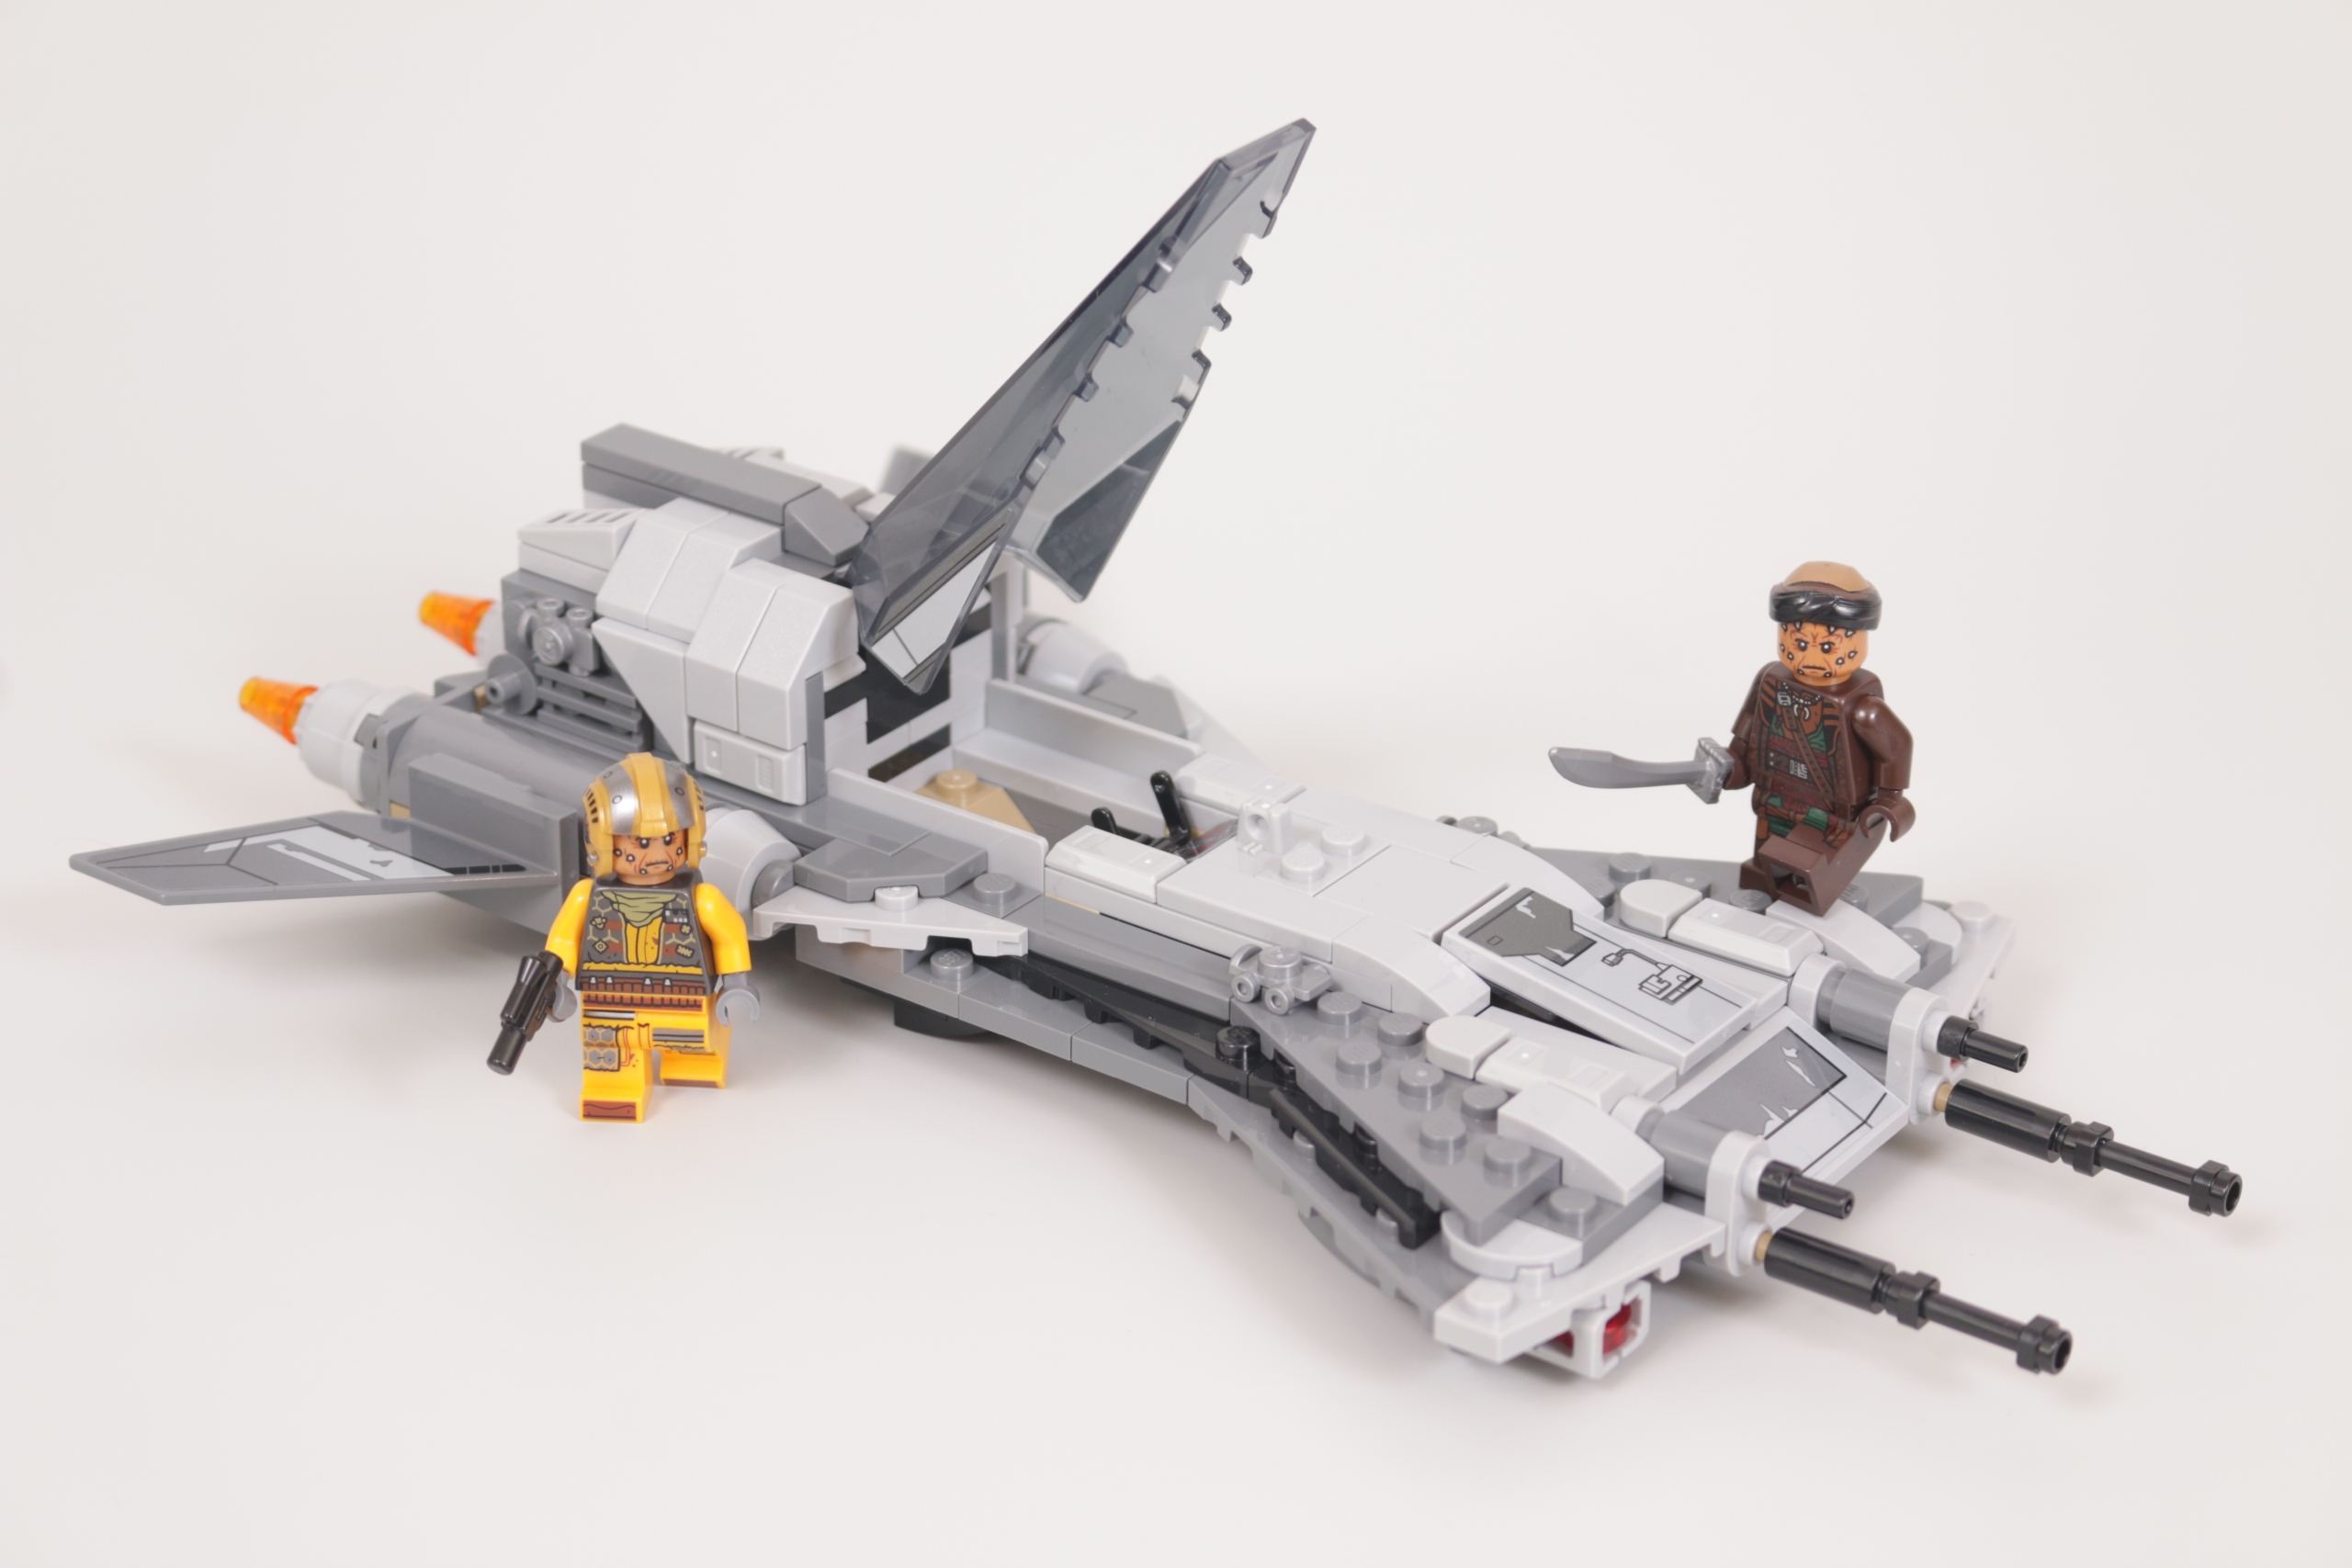 LEGO Star Wars 75346 Pirate Snub Fighter review and gallery